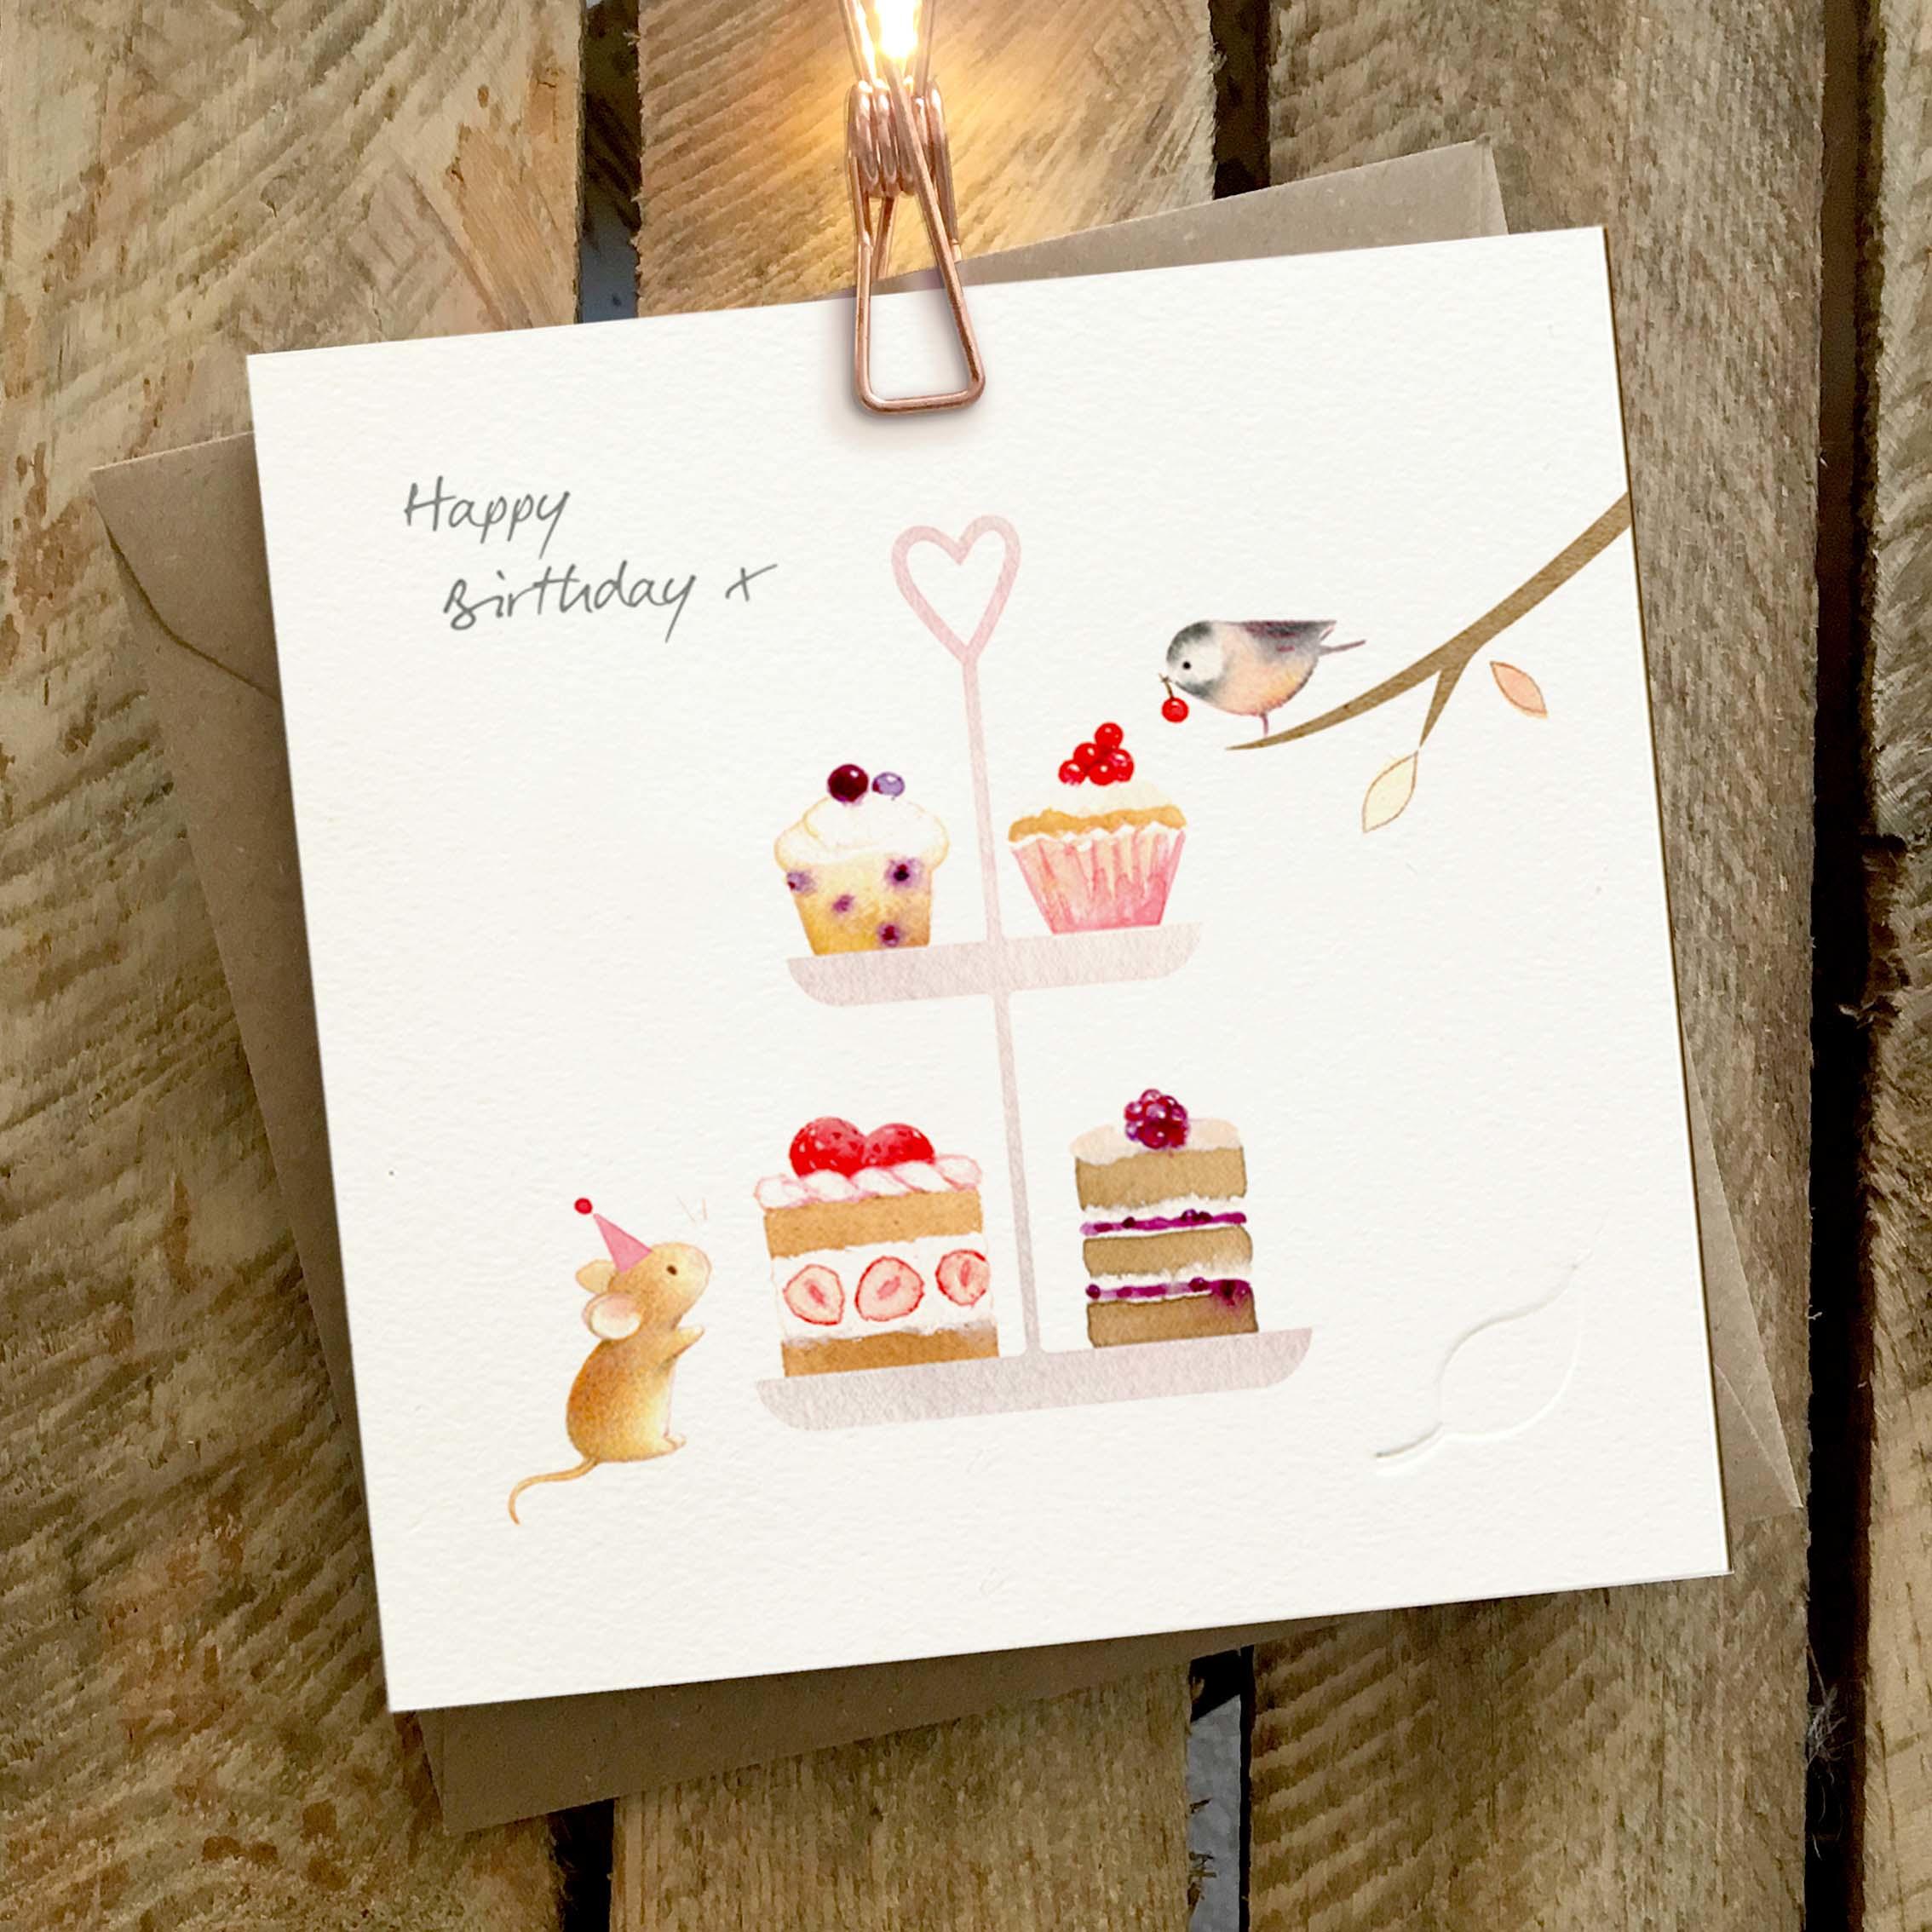 Card featuring a cute mouse and bird with a cake stand full of cakes and muffins